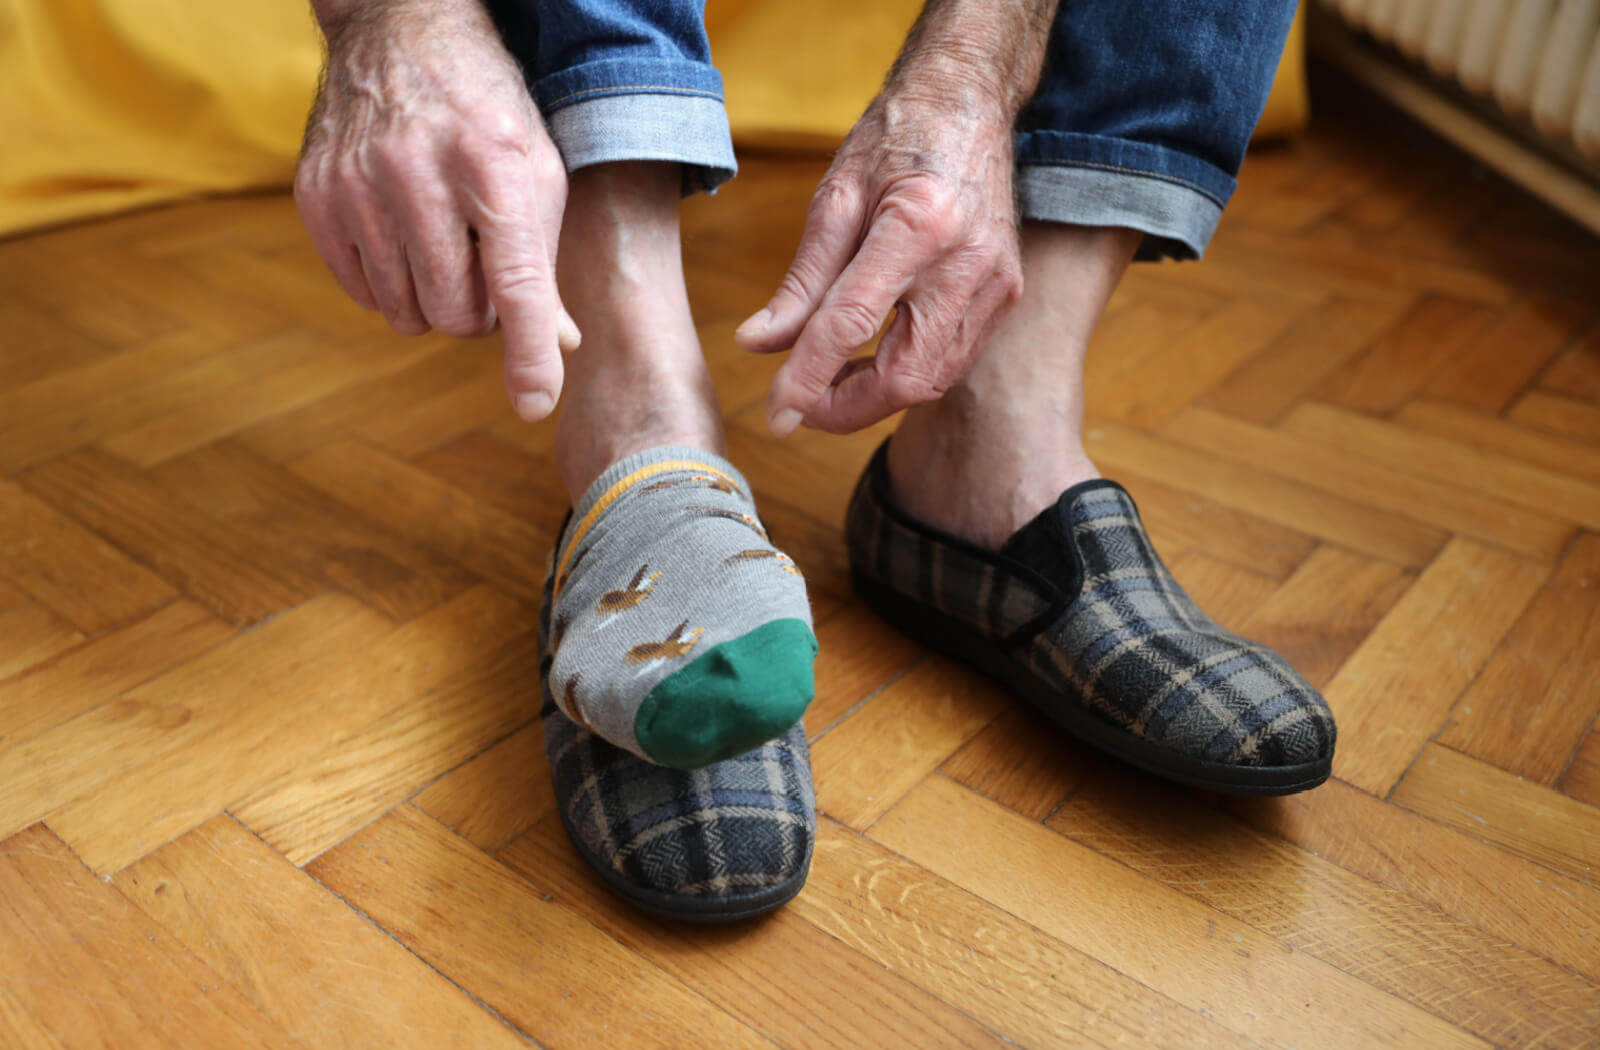 A senior man is putting socks on his right foot and putting them on his shoes.